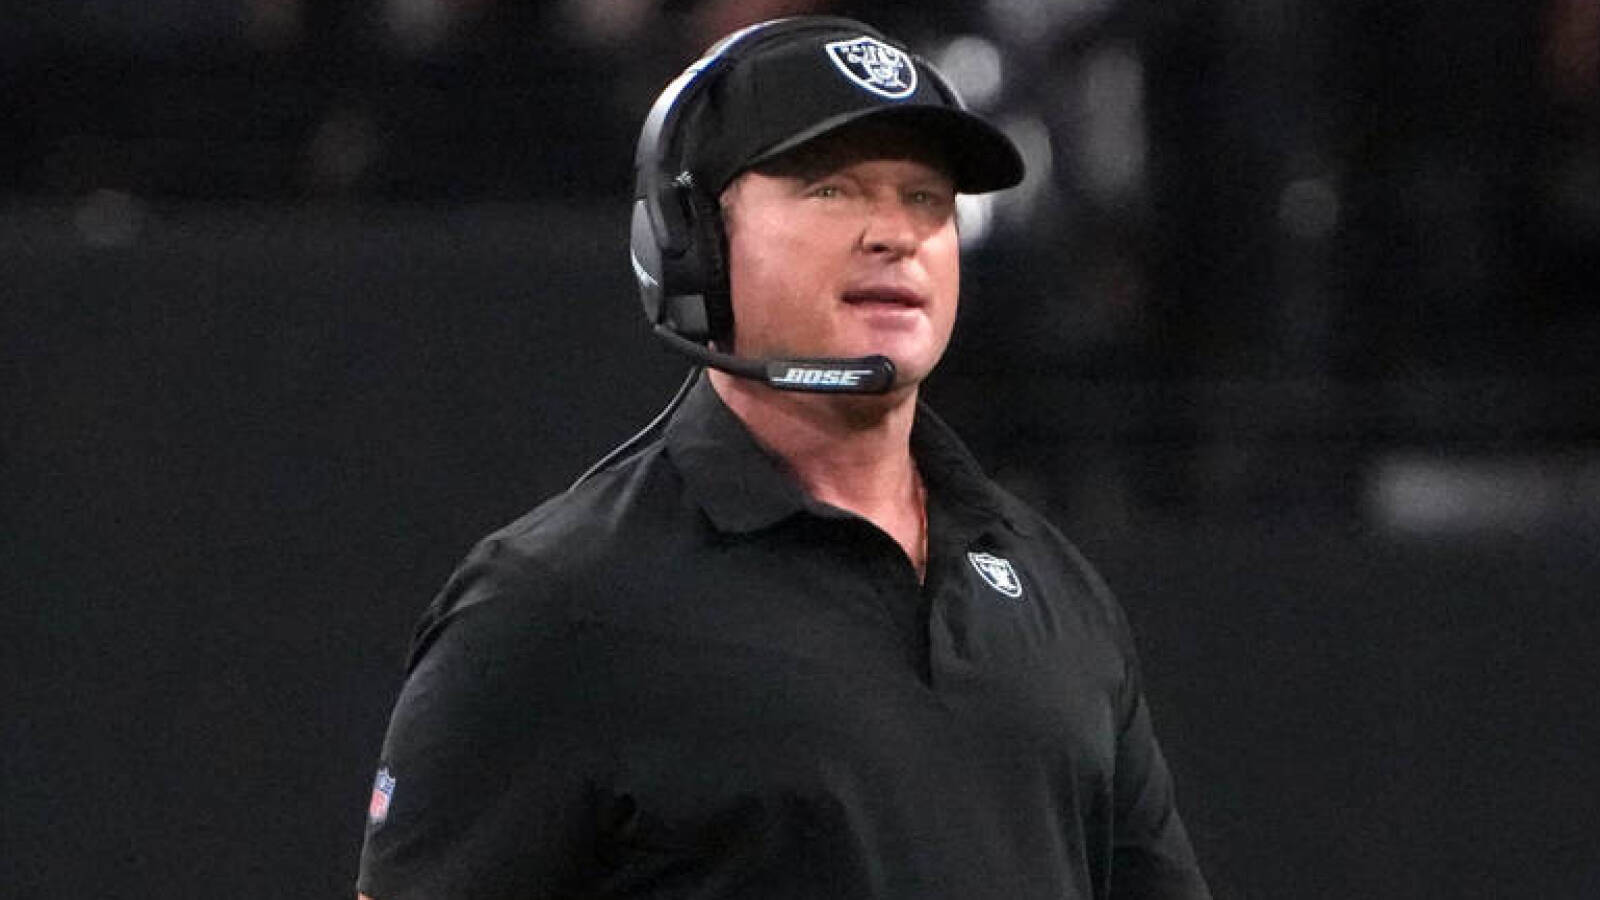 NFL scores big win in legal battle with ex-Raiders head coach